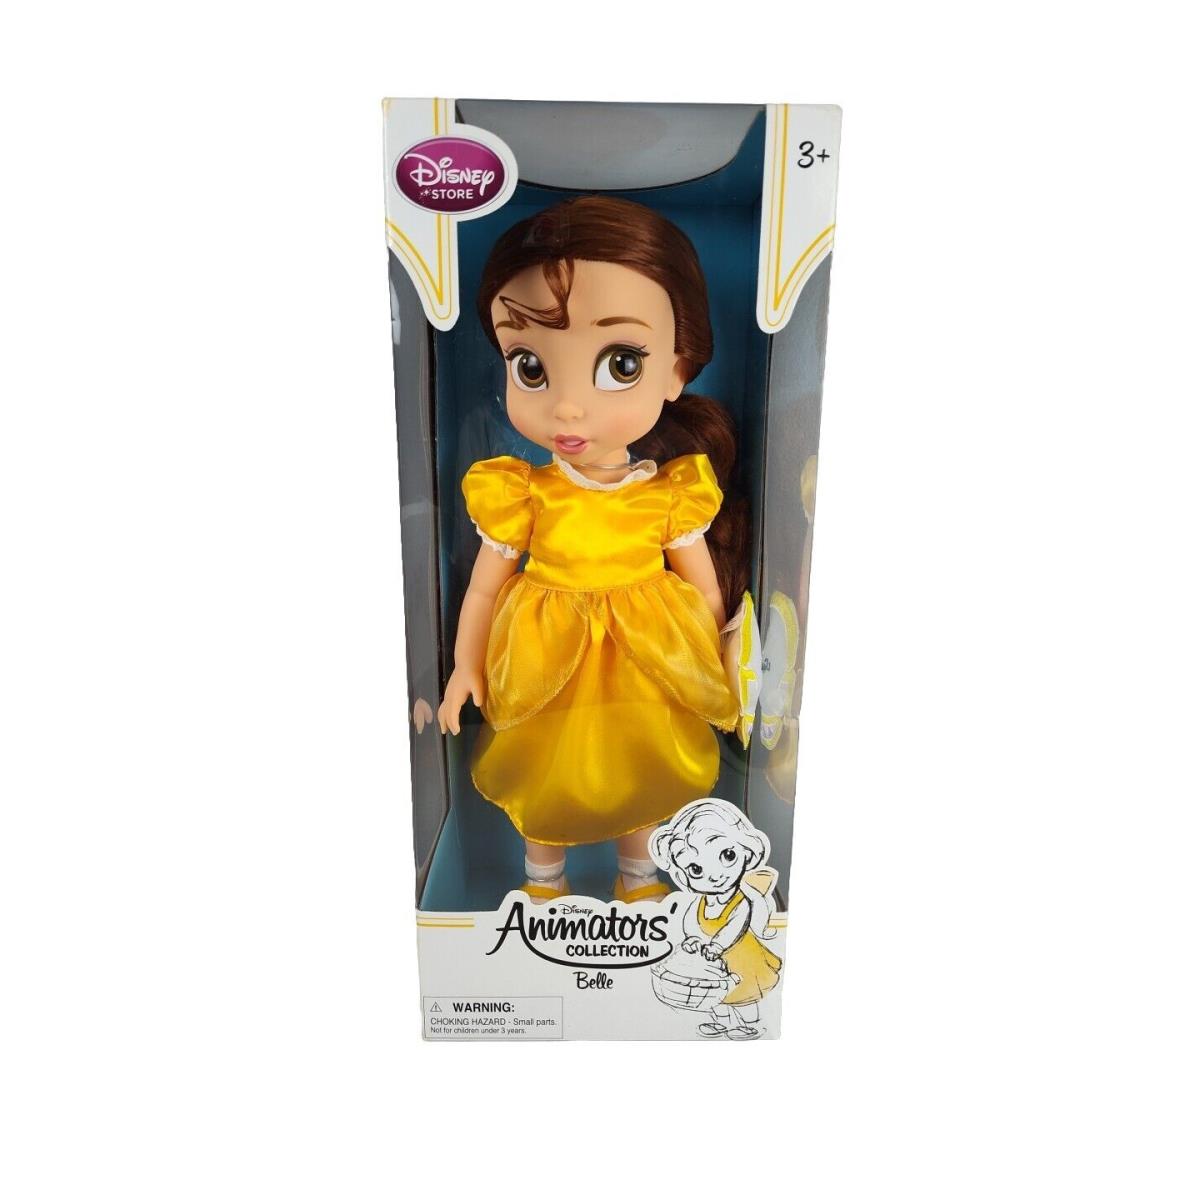 Disney Store Disney Animators Collection Belle 16 Inch Doll Beauty and The Beast